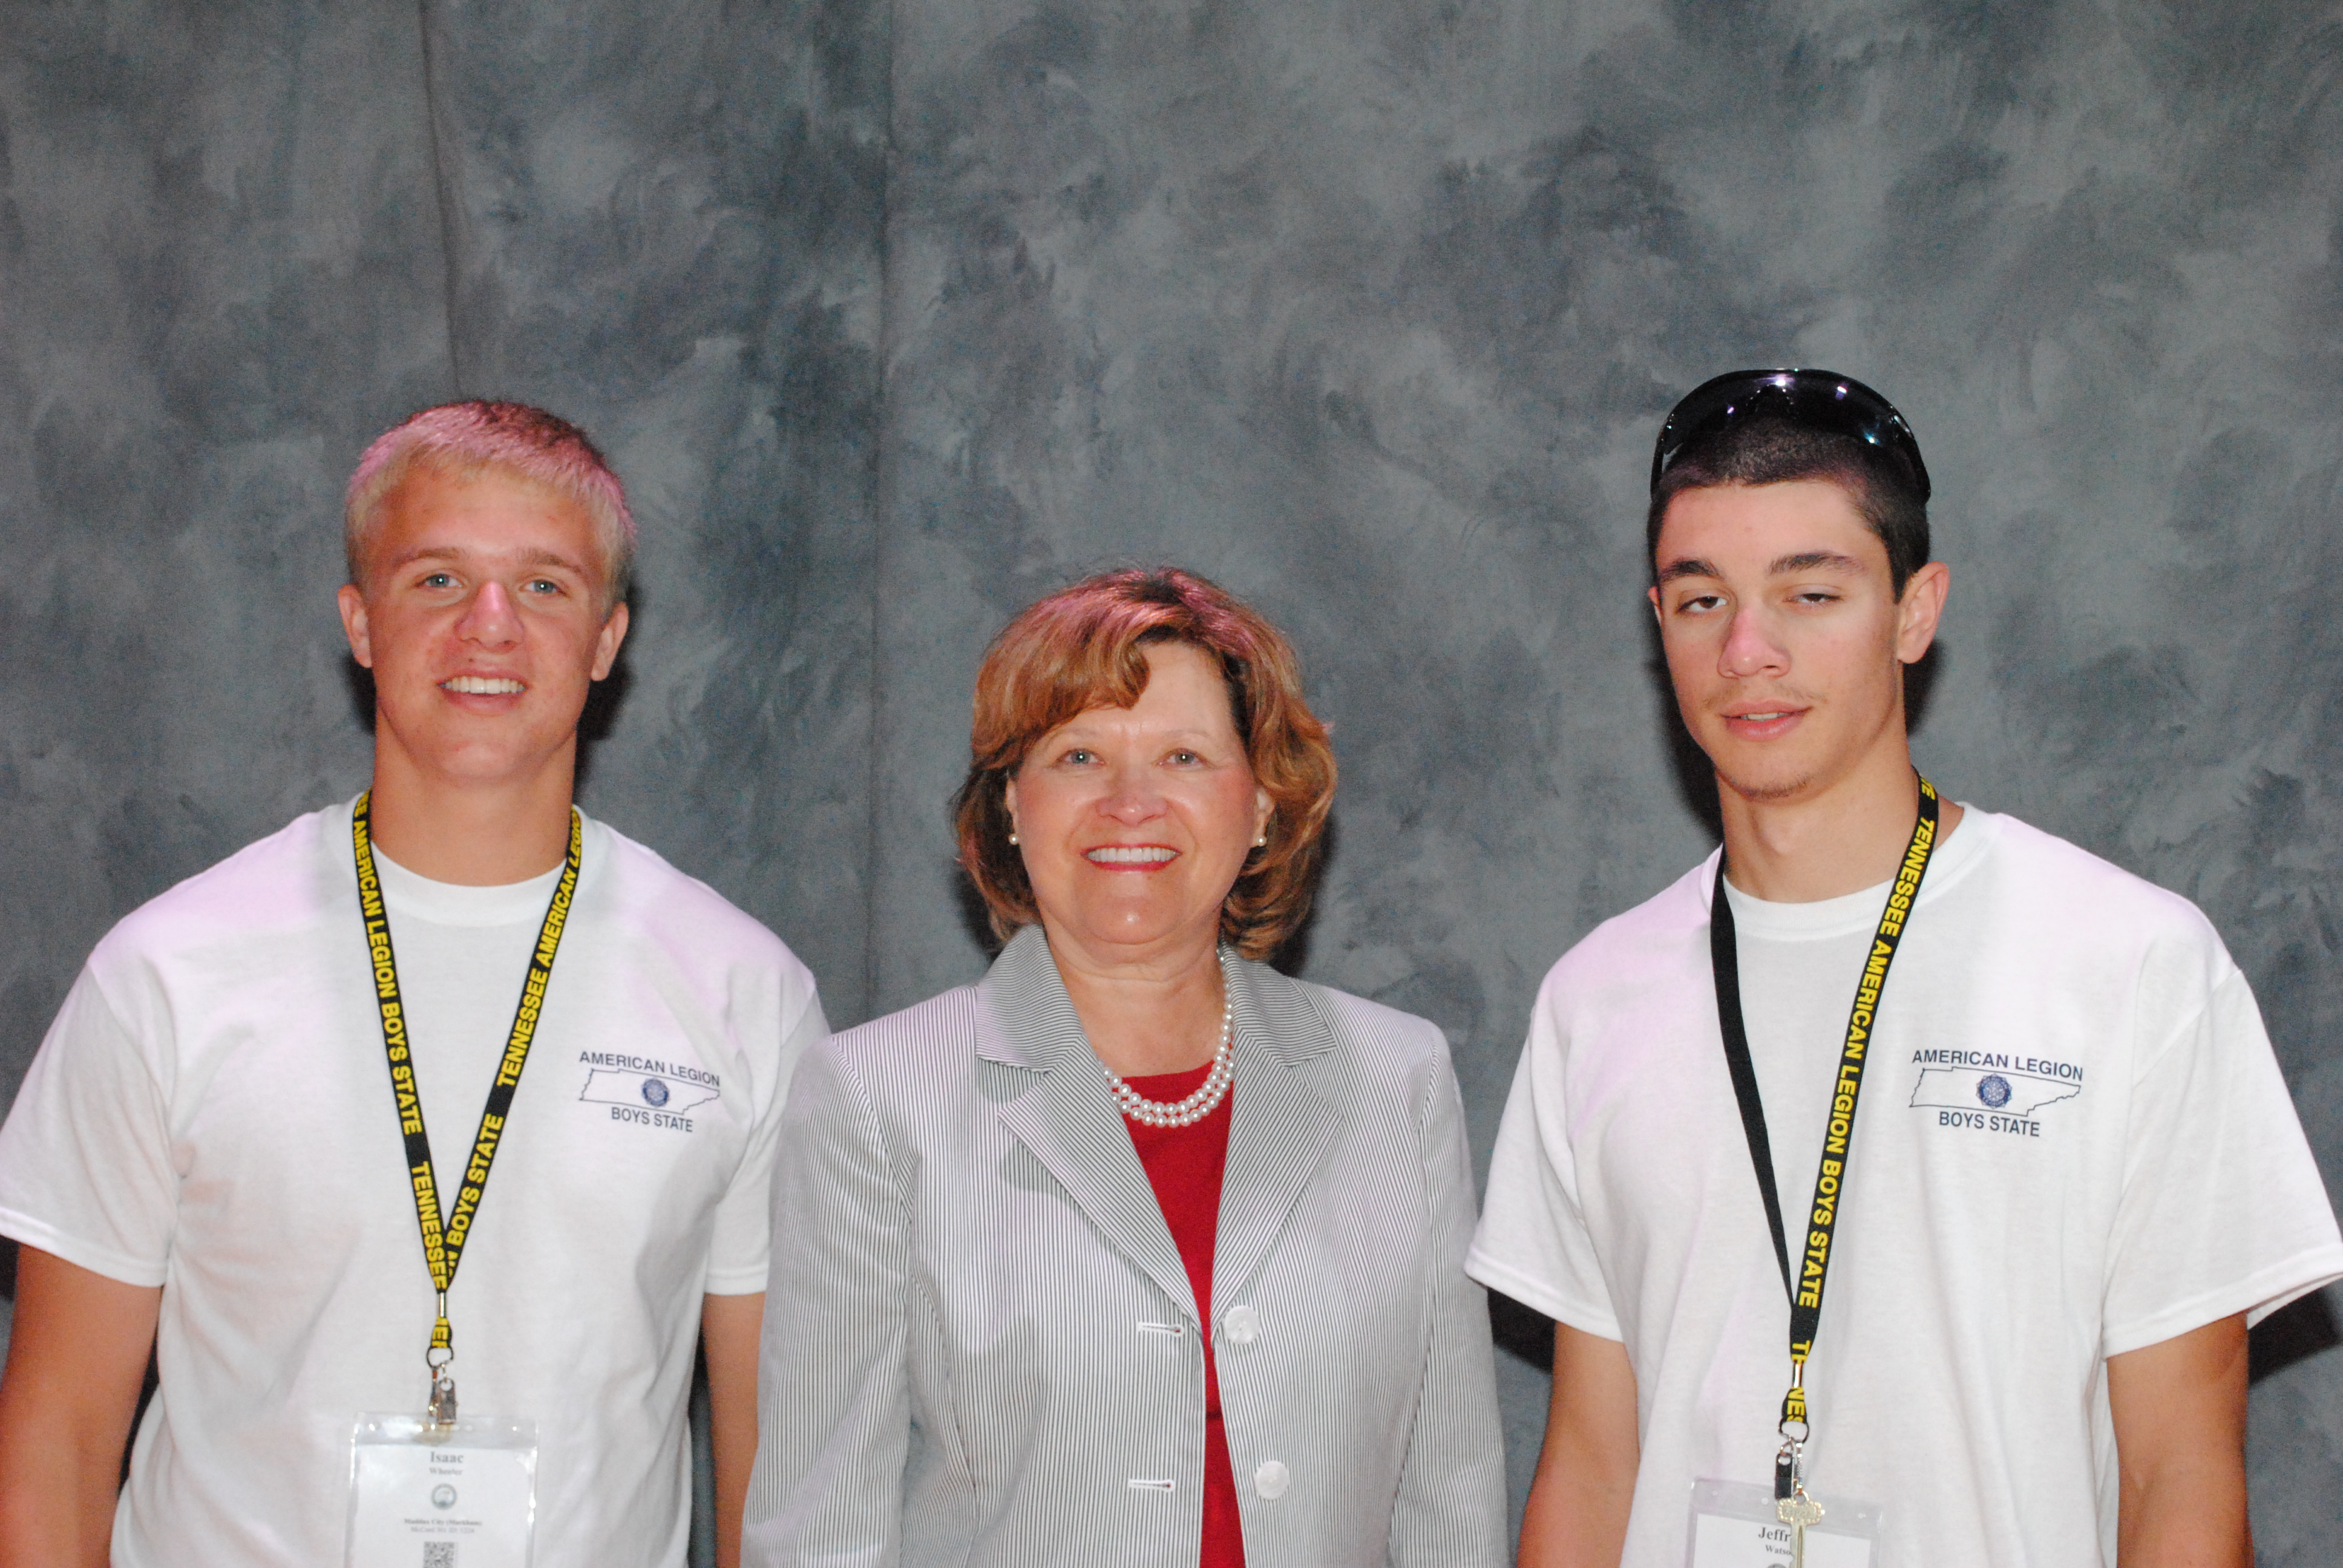 Justice Lee at Boys State 2013